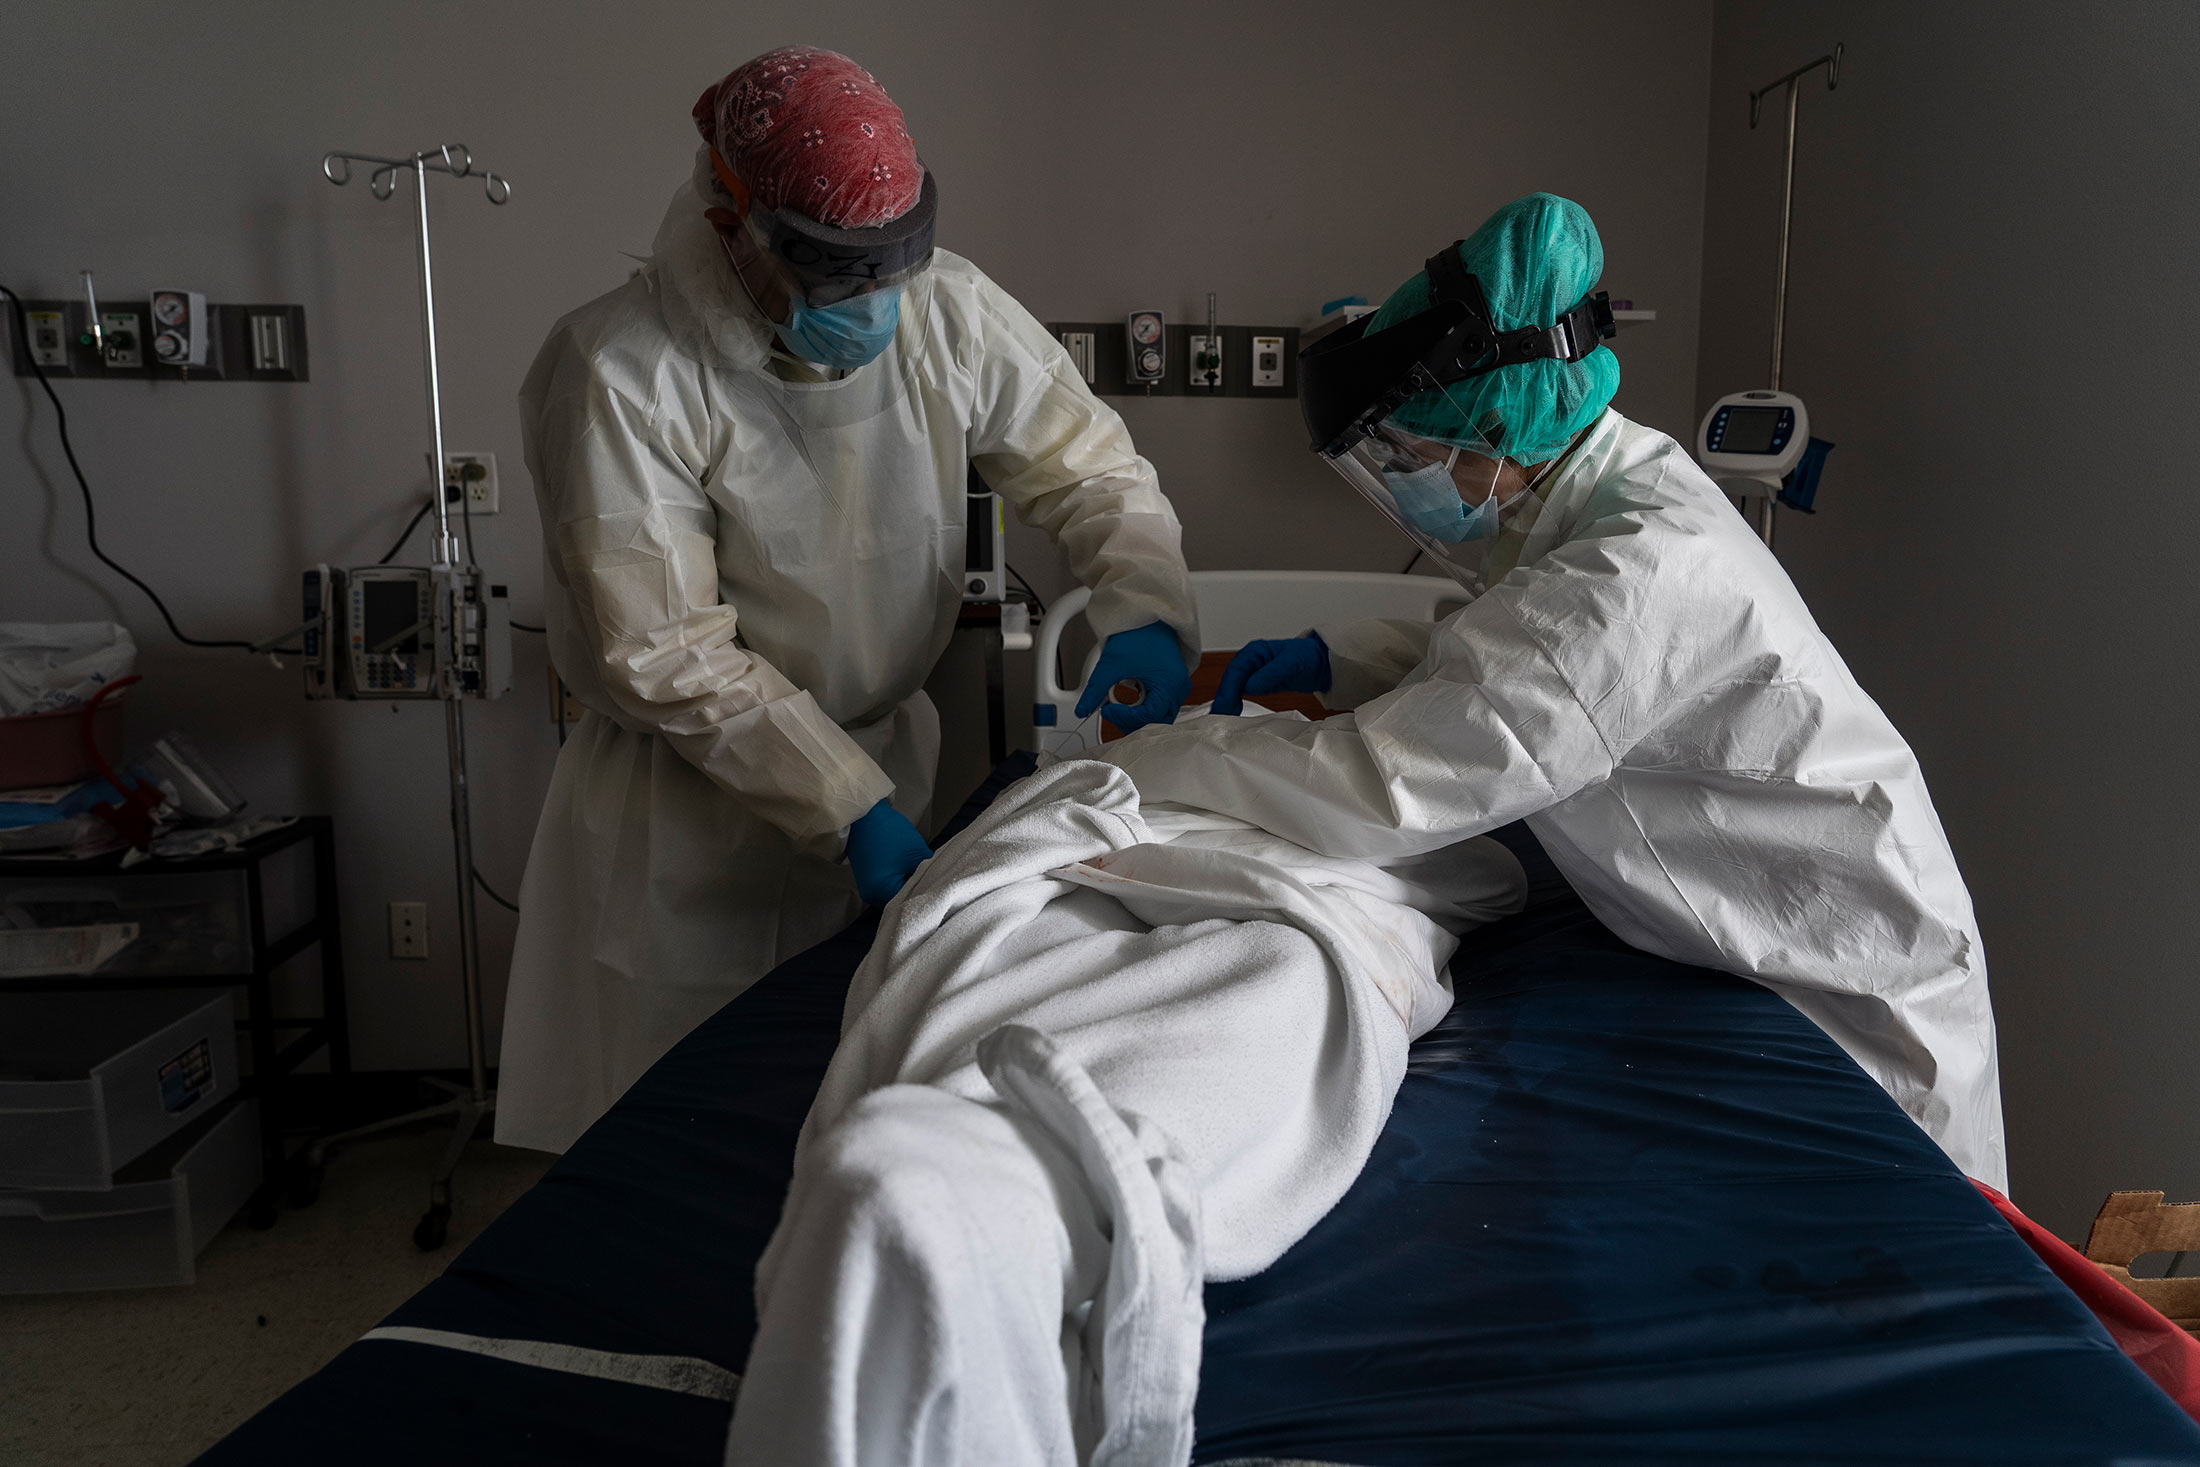 Medical staff&nbsp;wrap a deceased patient with bed sheets in the Covid-19 ICU&nbsp;at a hospital in Houston, Texas, in June.&nbsp;